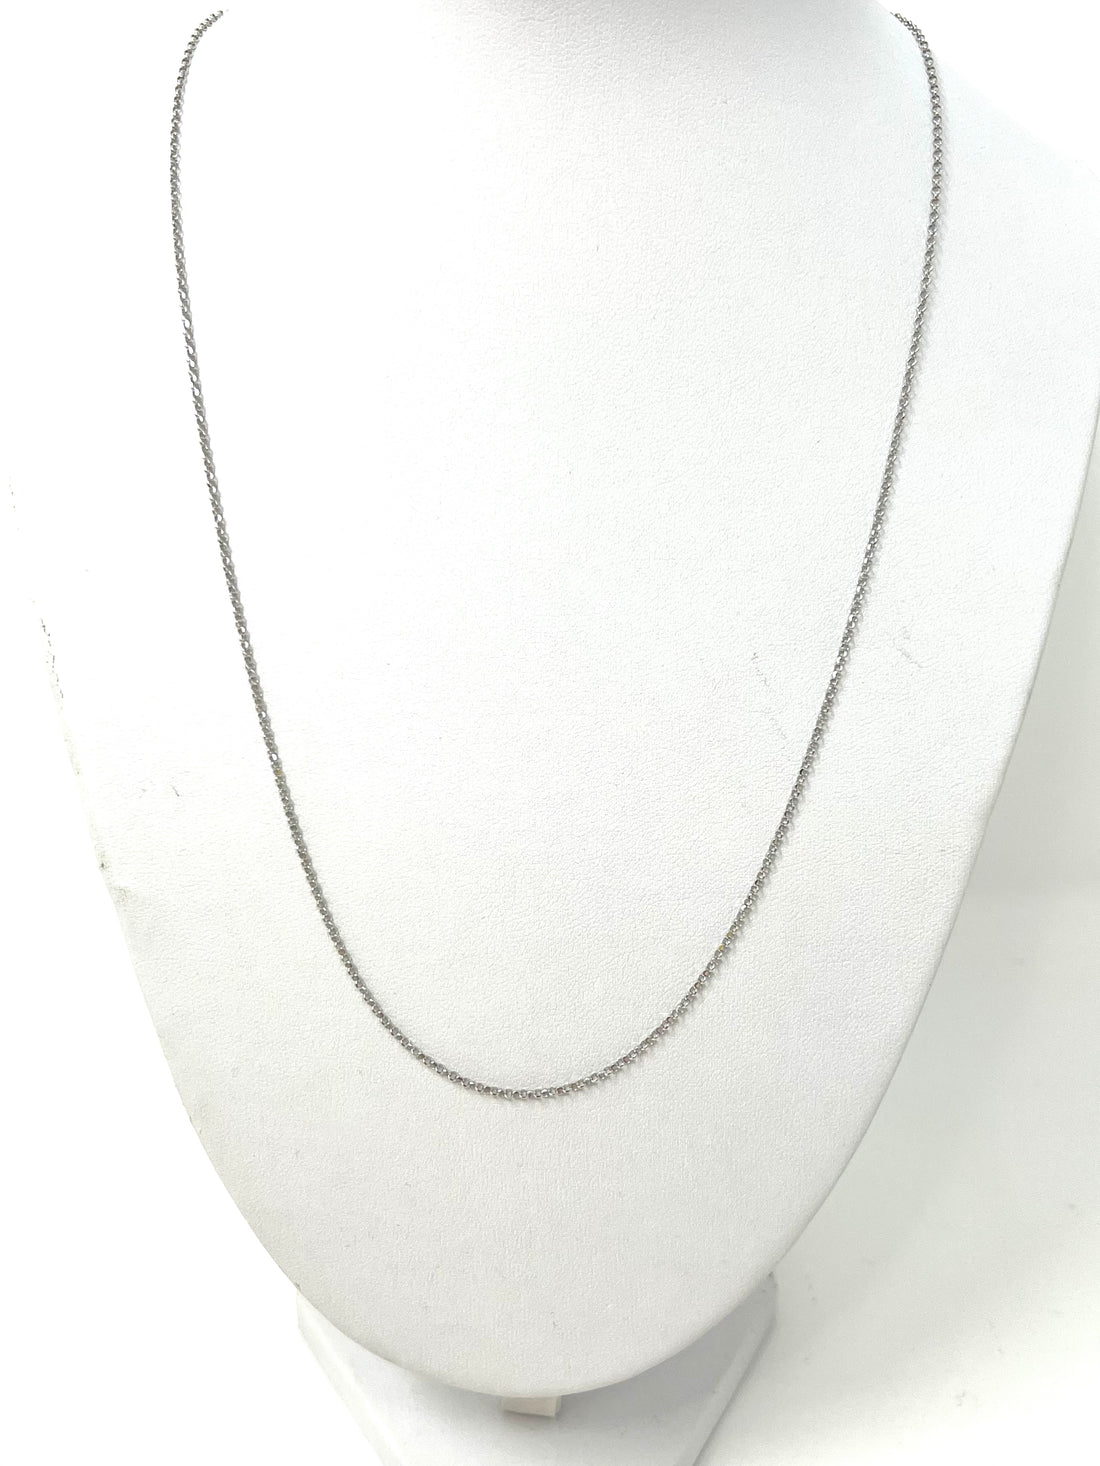 Charming 20” Delicate Chain in Silver